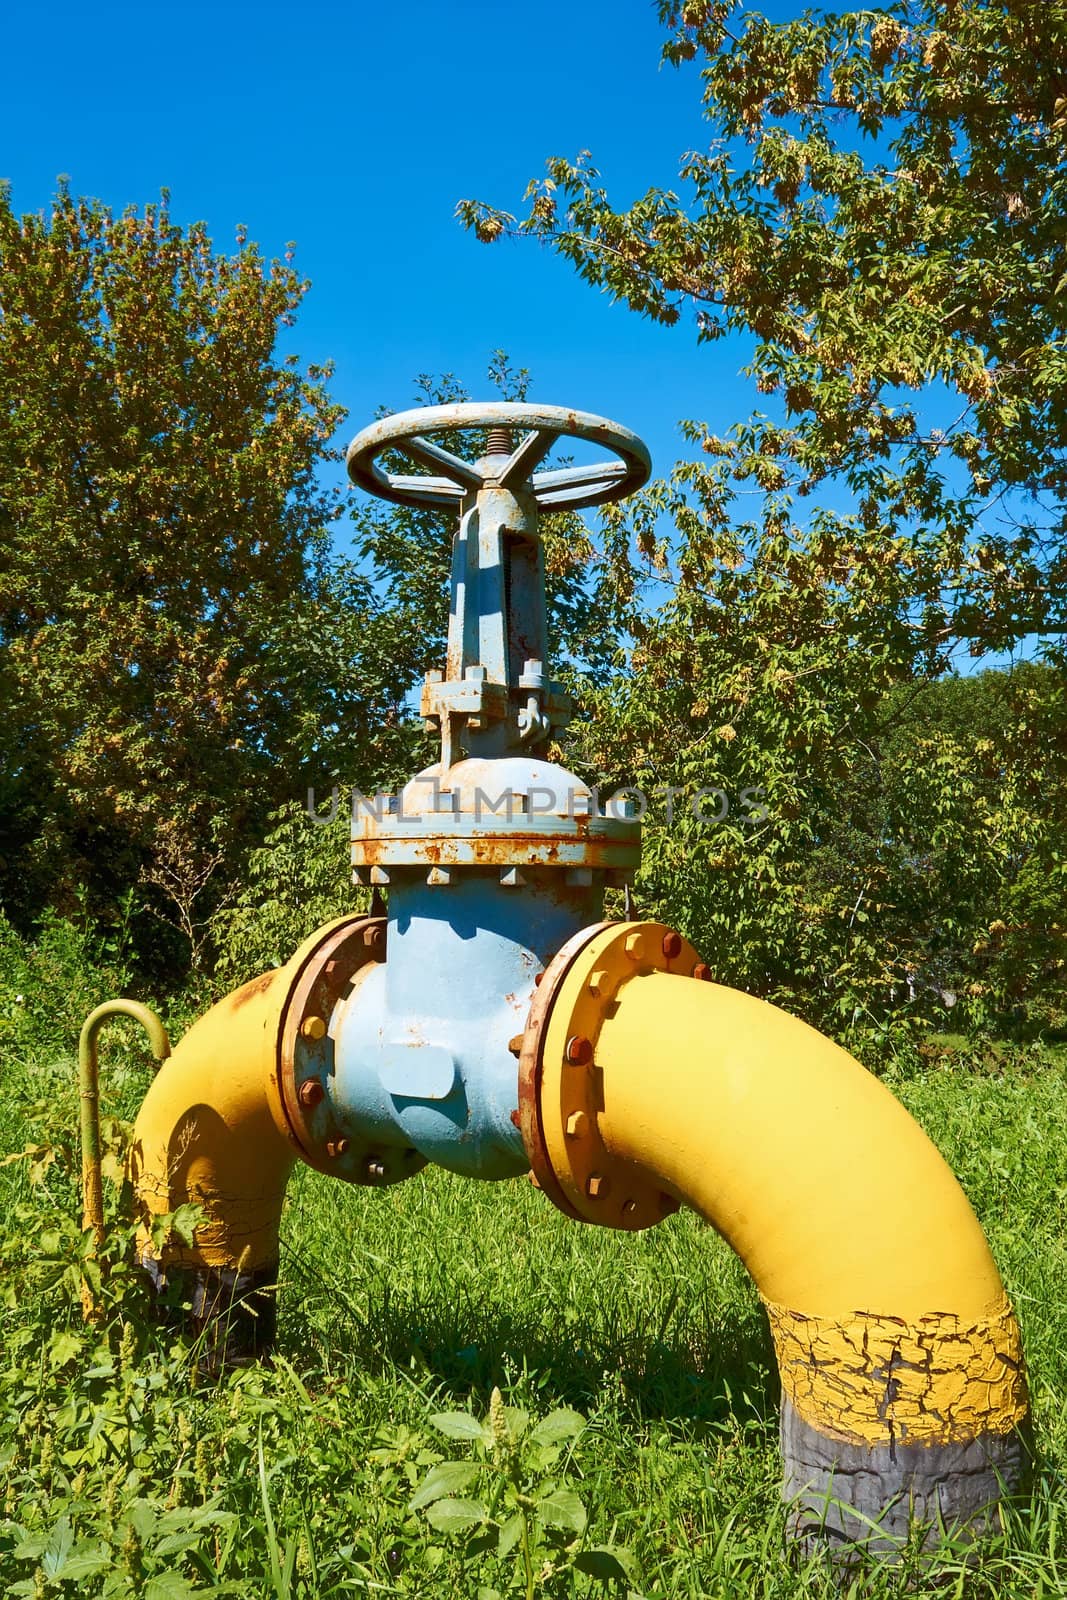 Large bent metal gas pipe with a valve on a green lawn